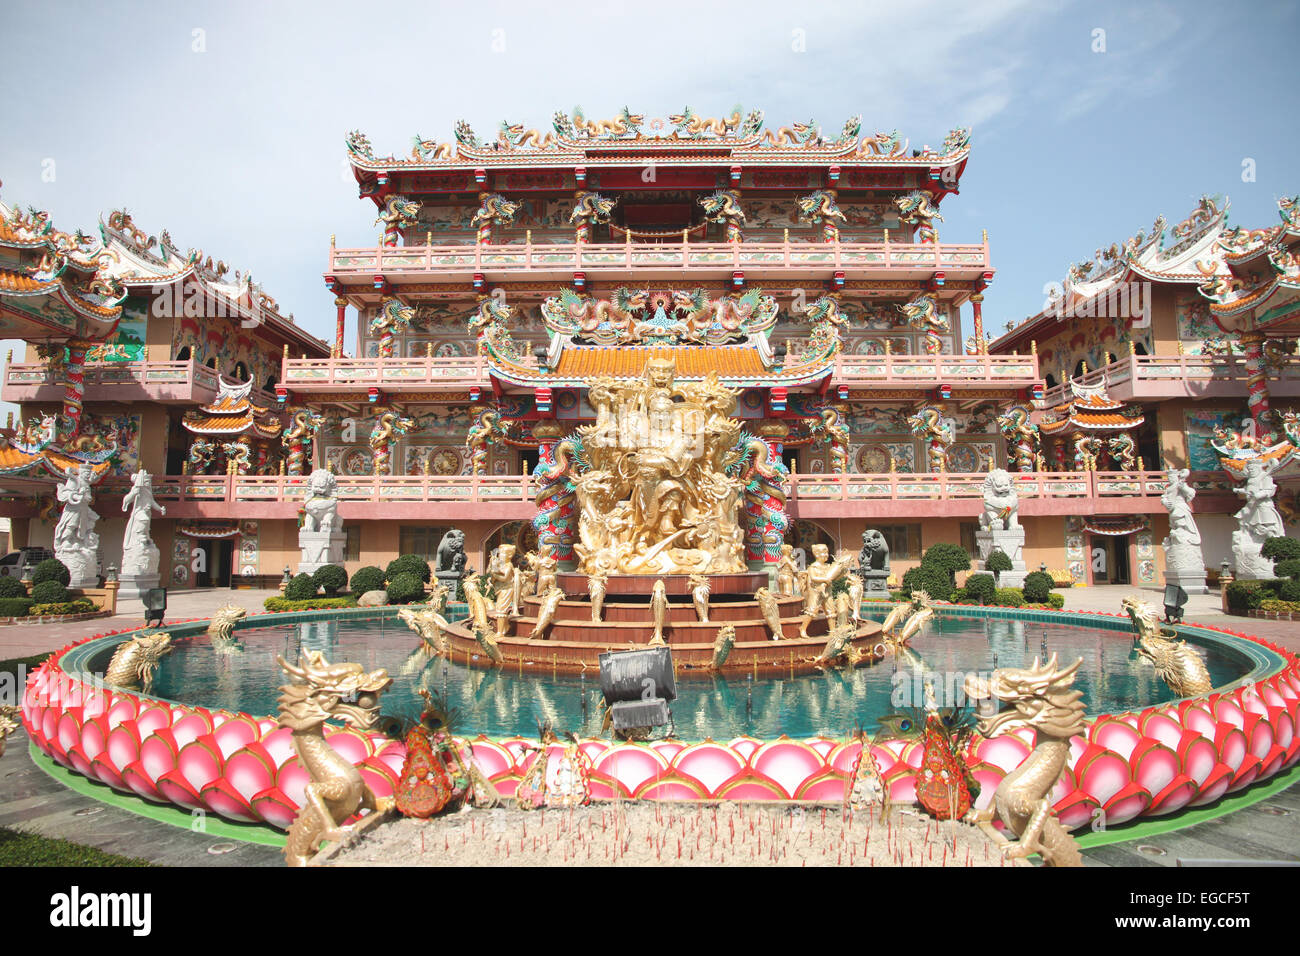 Sculpture in the Chinese Temple on blue sky and white cloud. Stock Photo